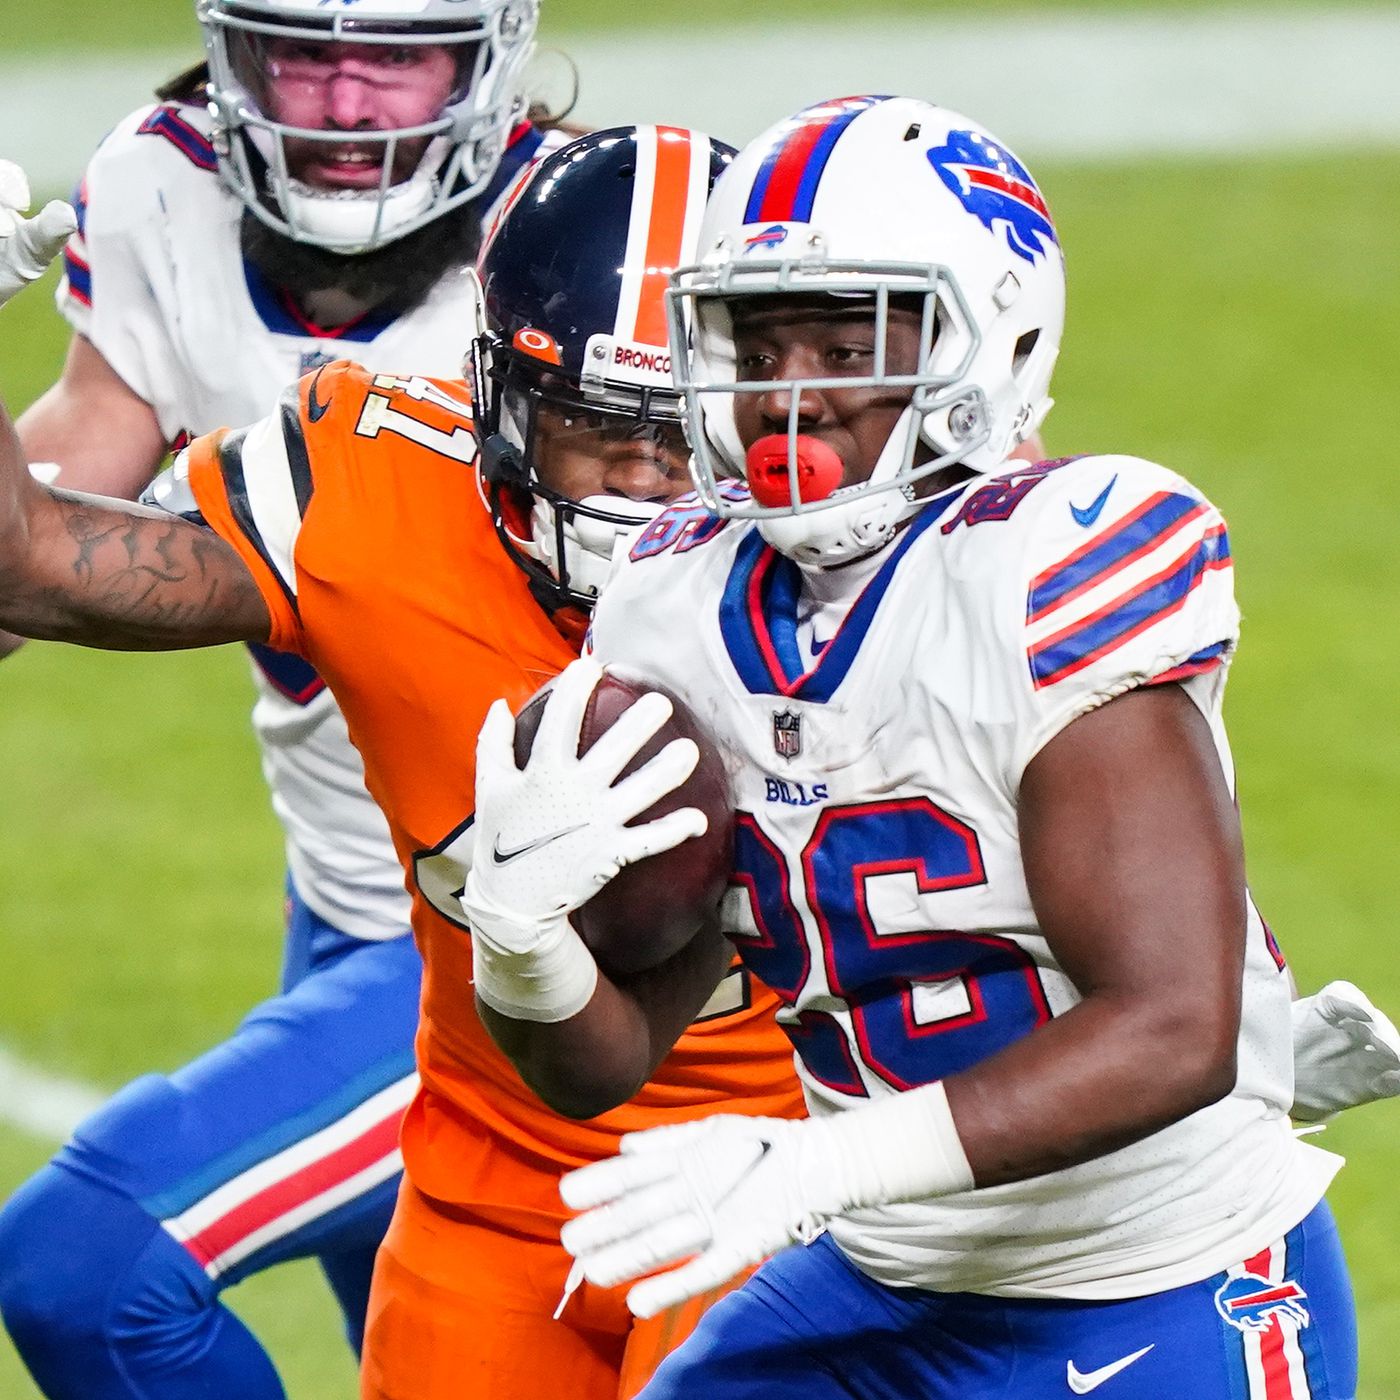 NFL Free Agent offensive players Buffalo Bills should target to